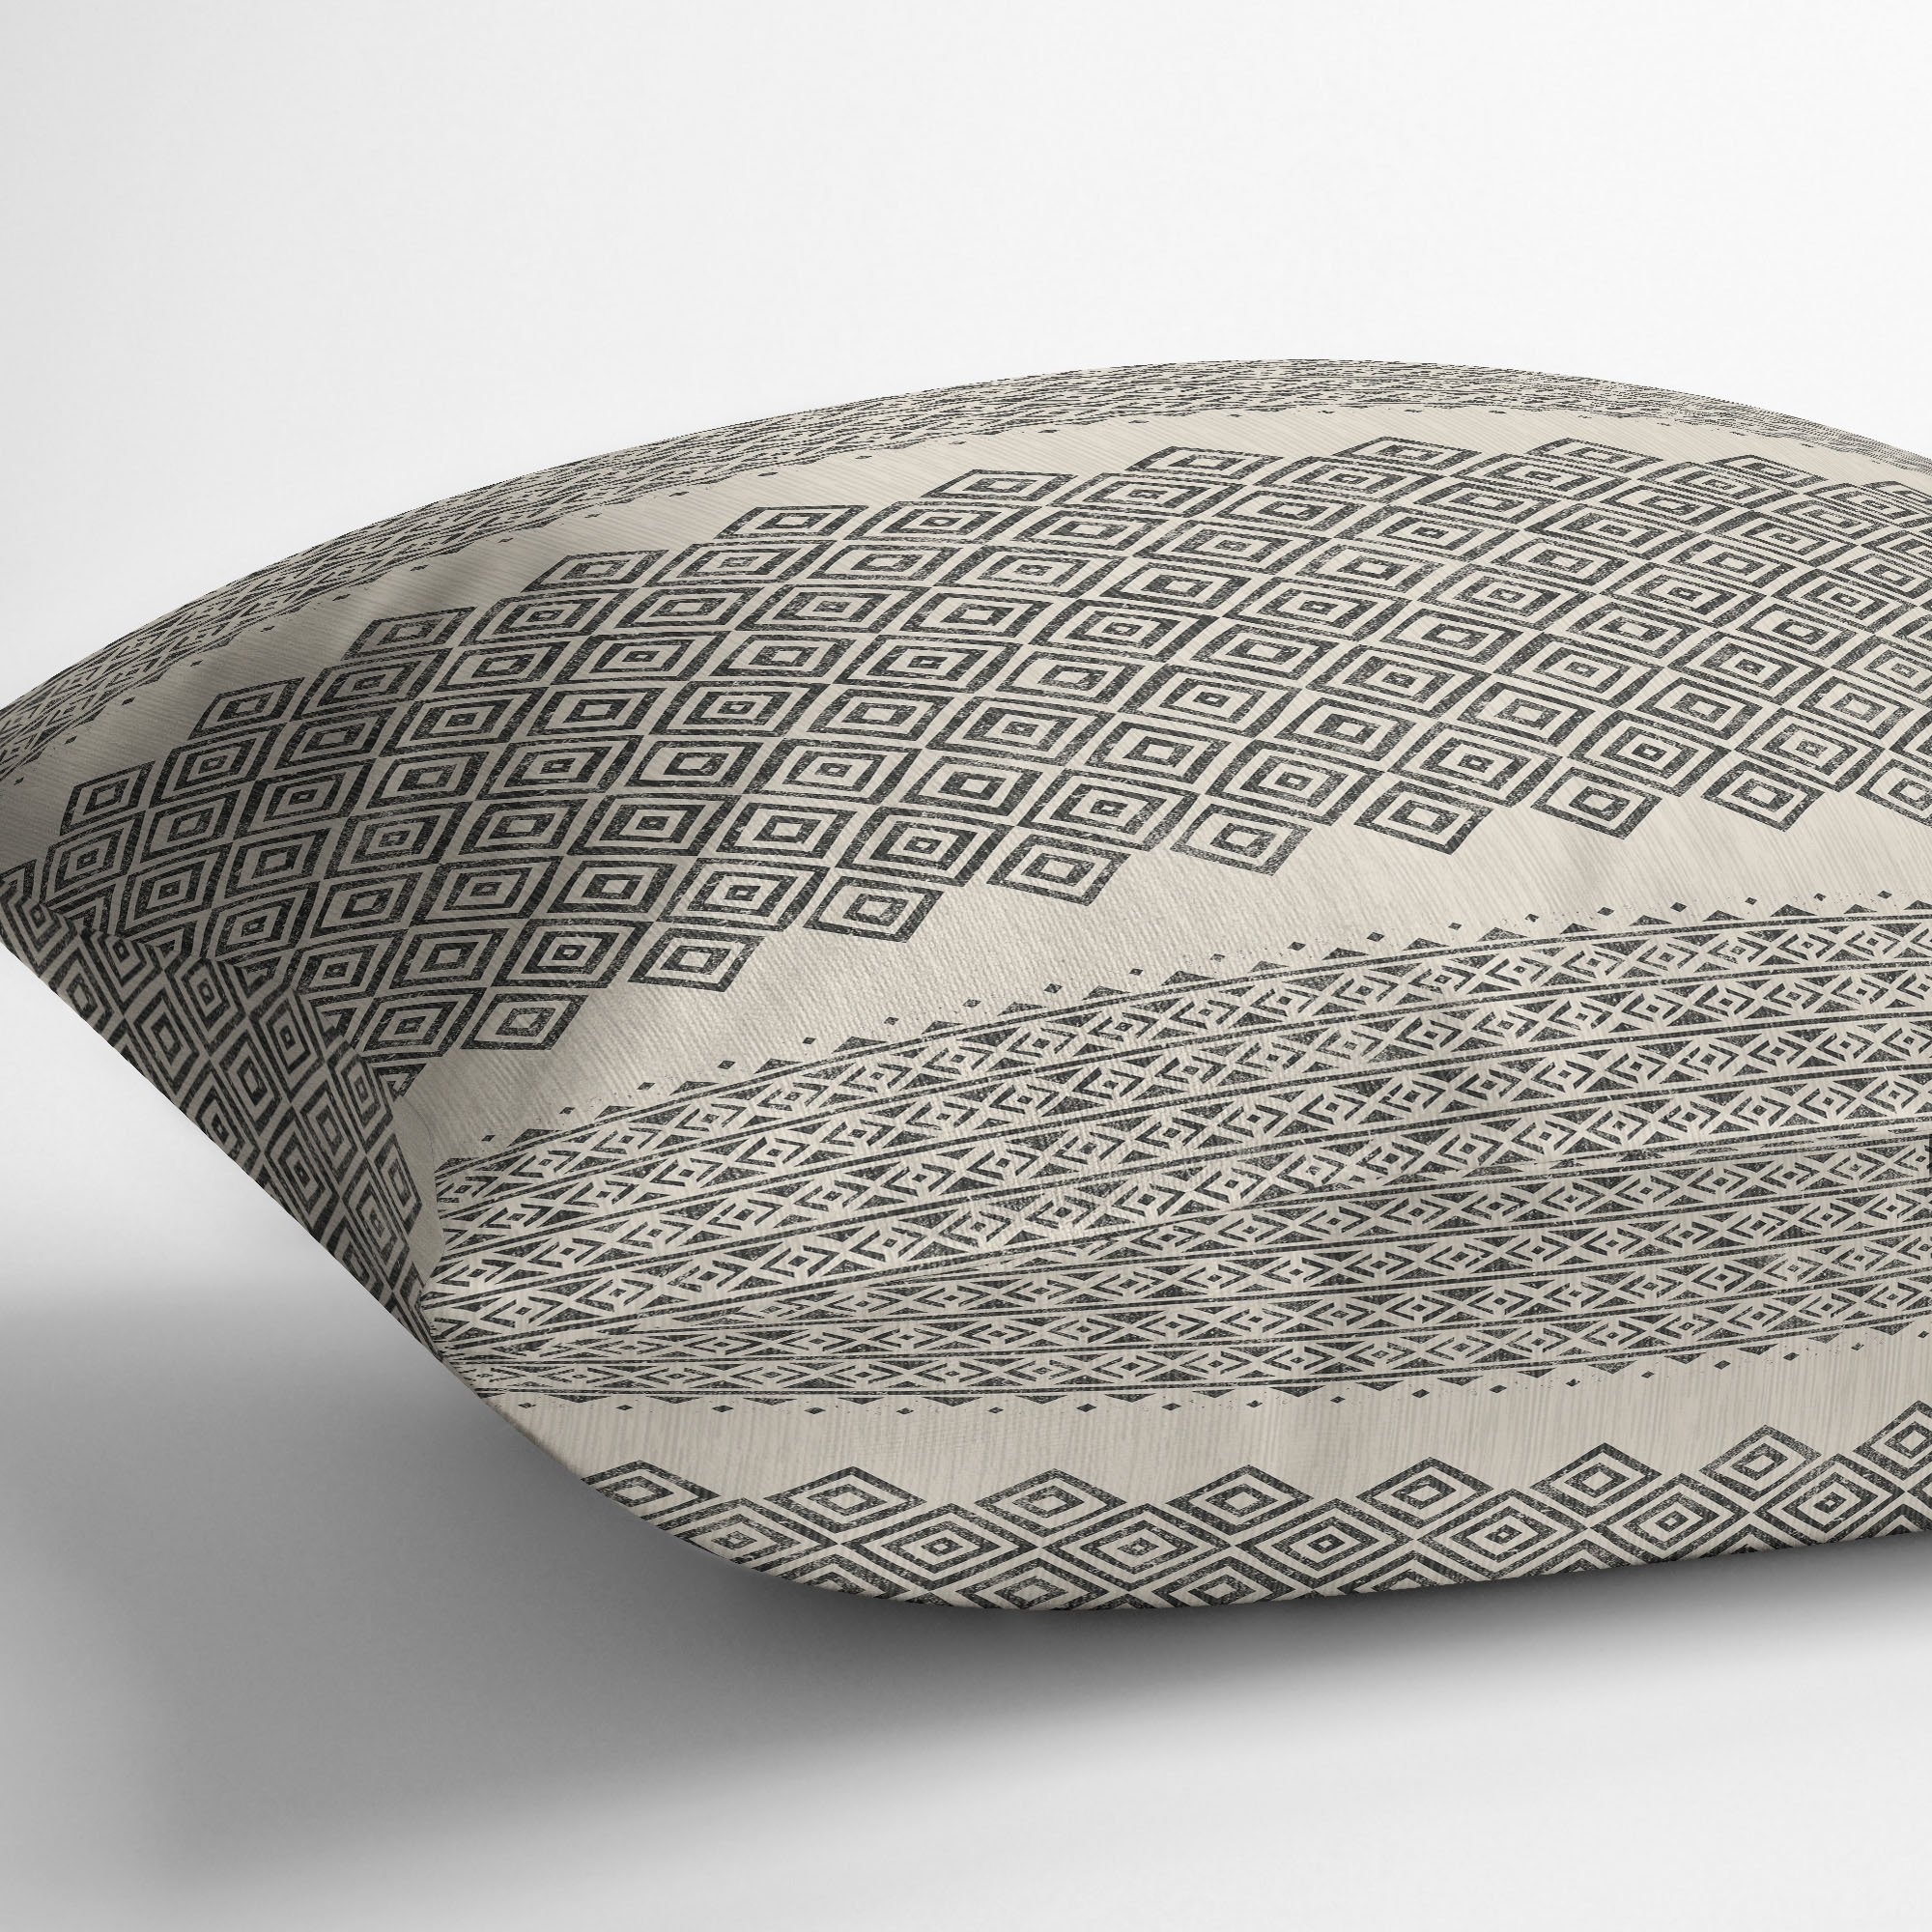 Uma Beige Outdoor Pillow by Kavka Designs - image 4 of 5